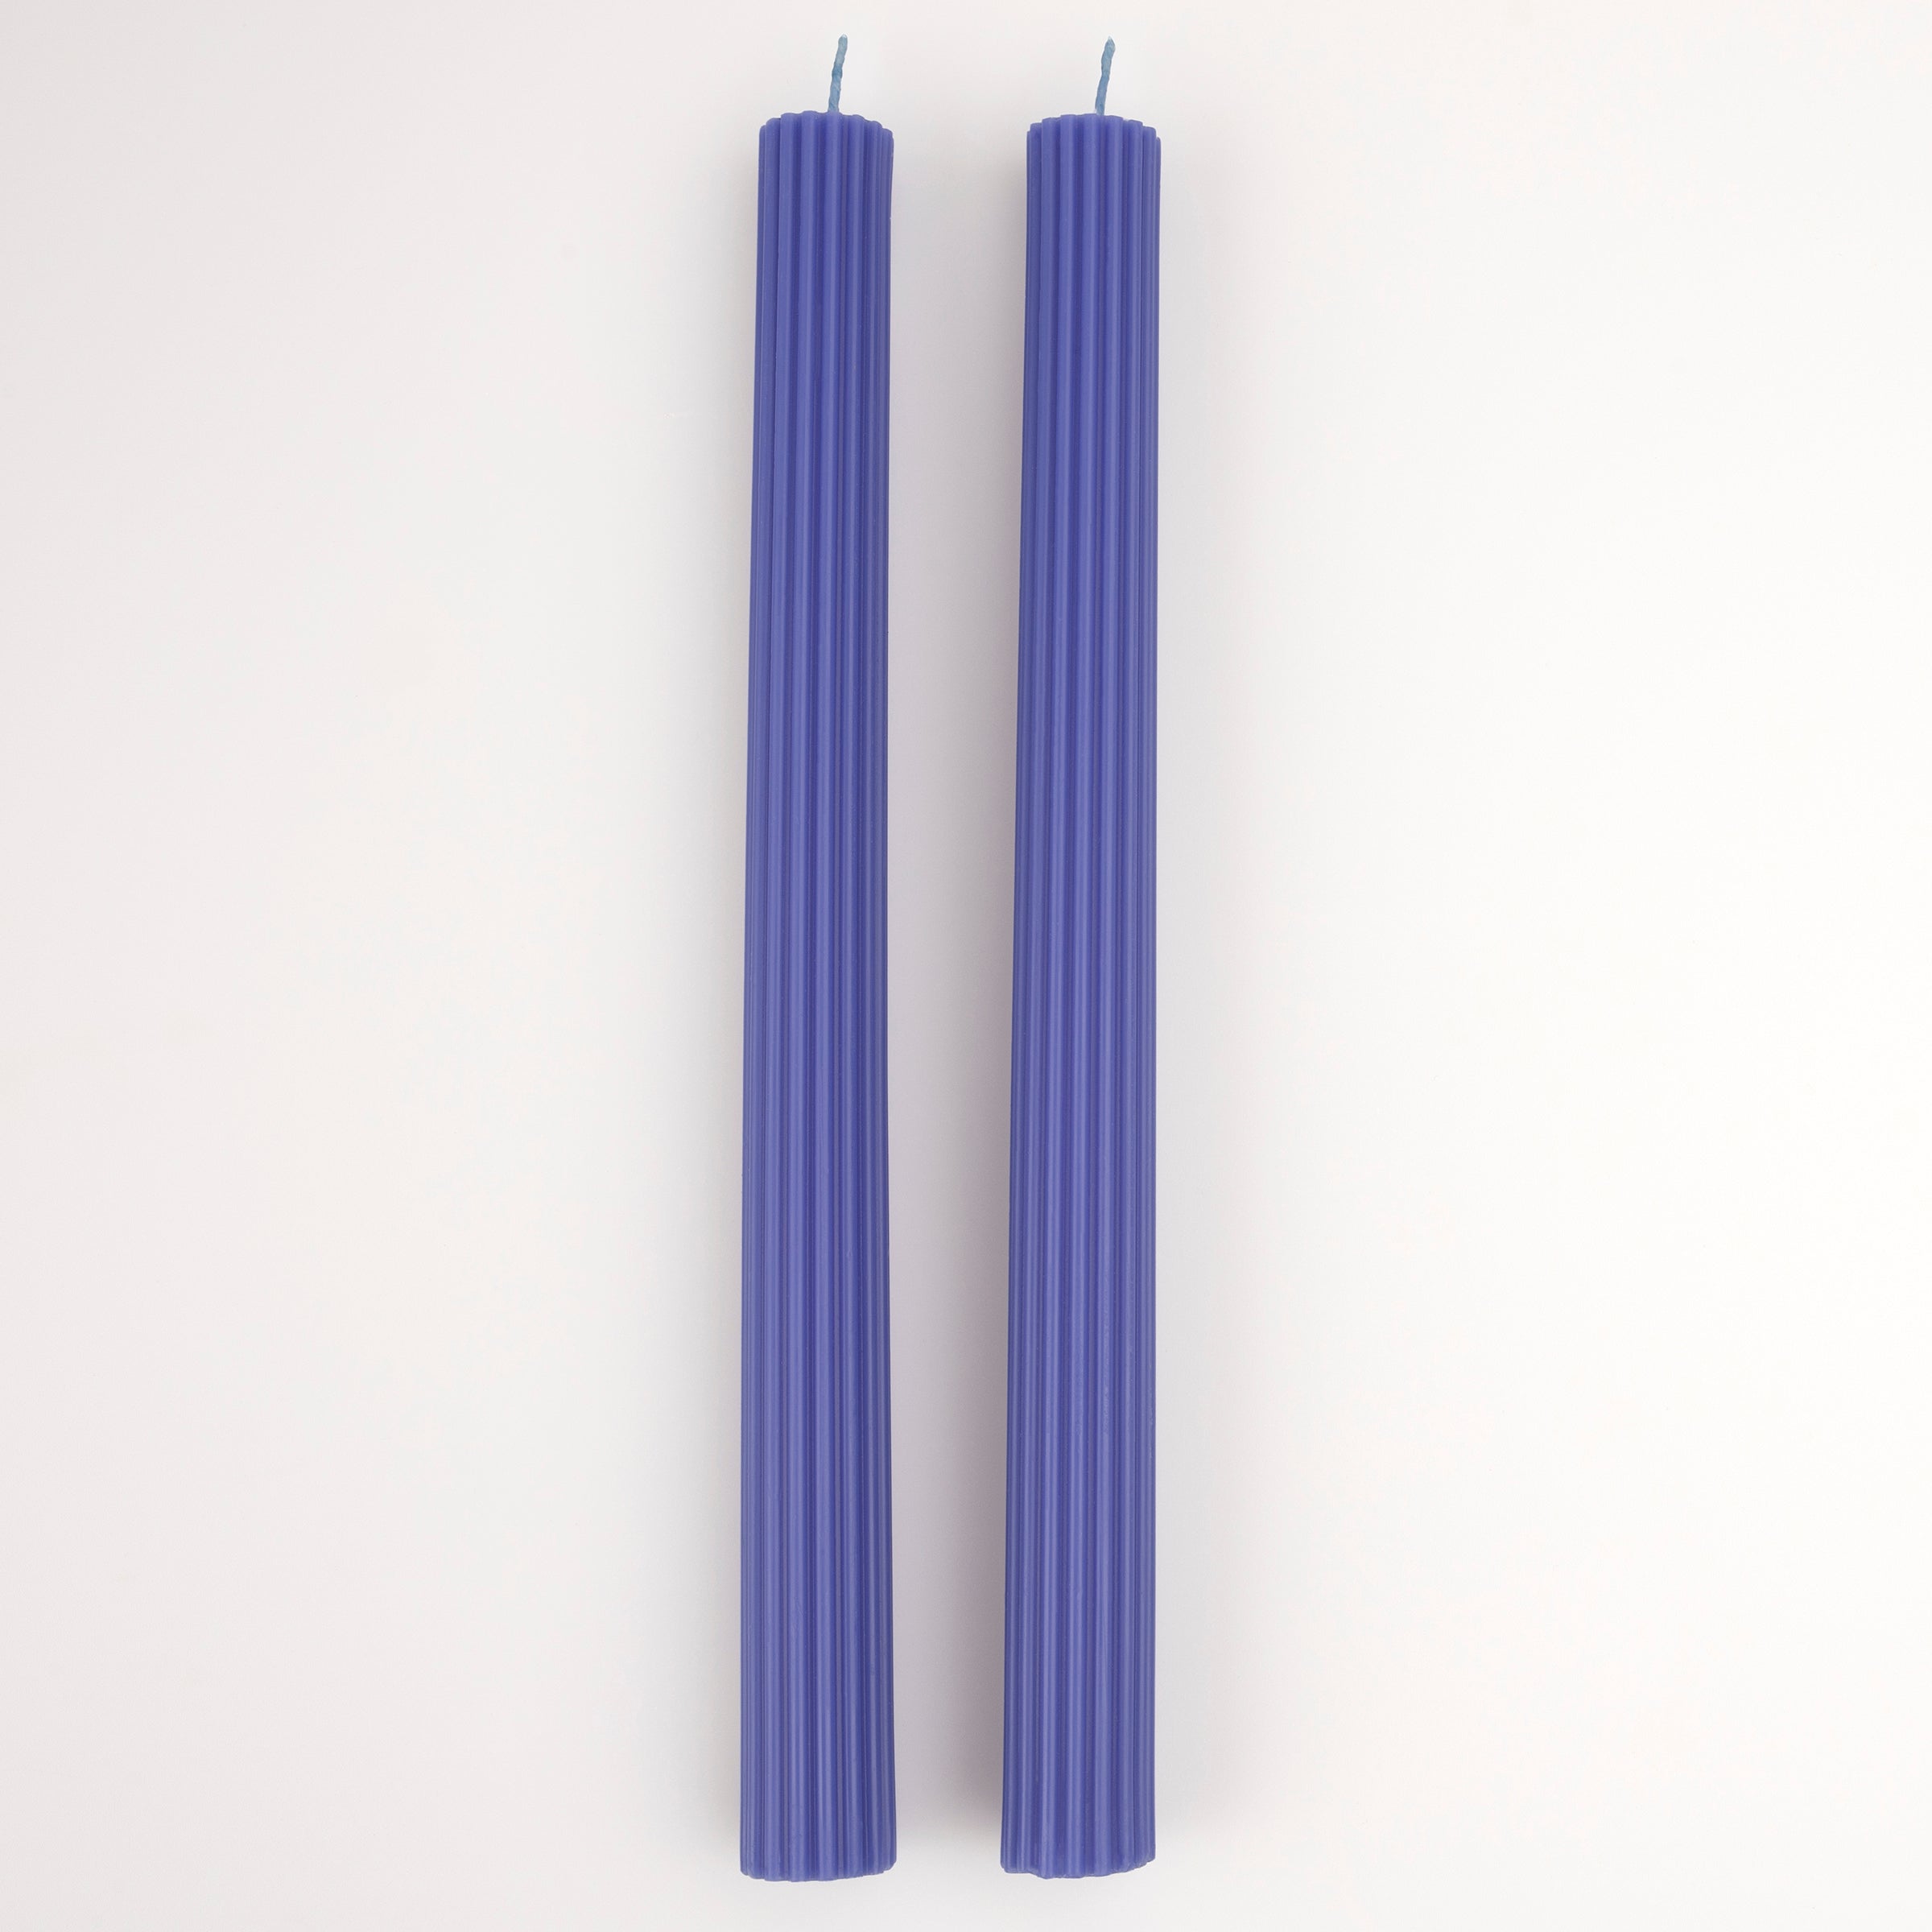 Make your party table look amazing with our ridged blue candles with blue wicks, ideal for any party with a blue theme.